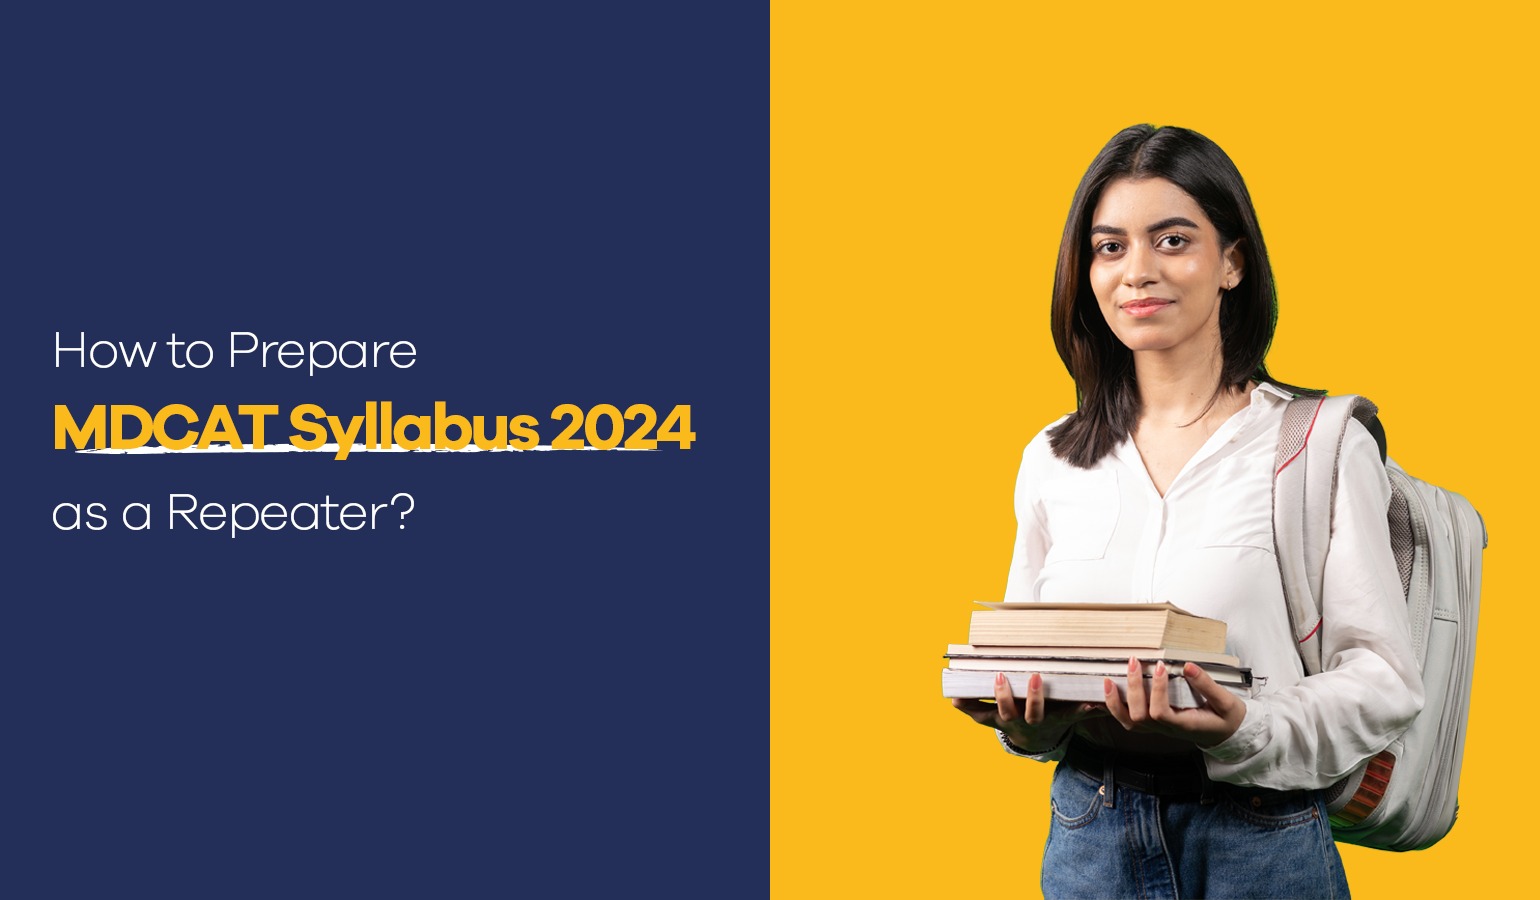 How to Prepare MDCAT Syllabus 2024 as a Repeater?